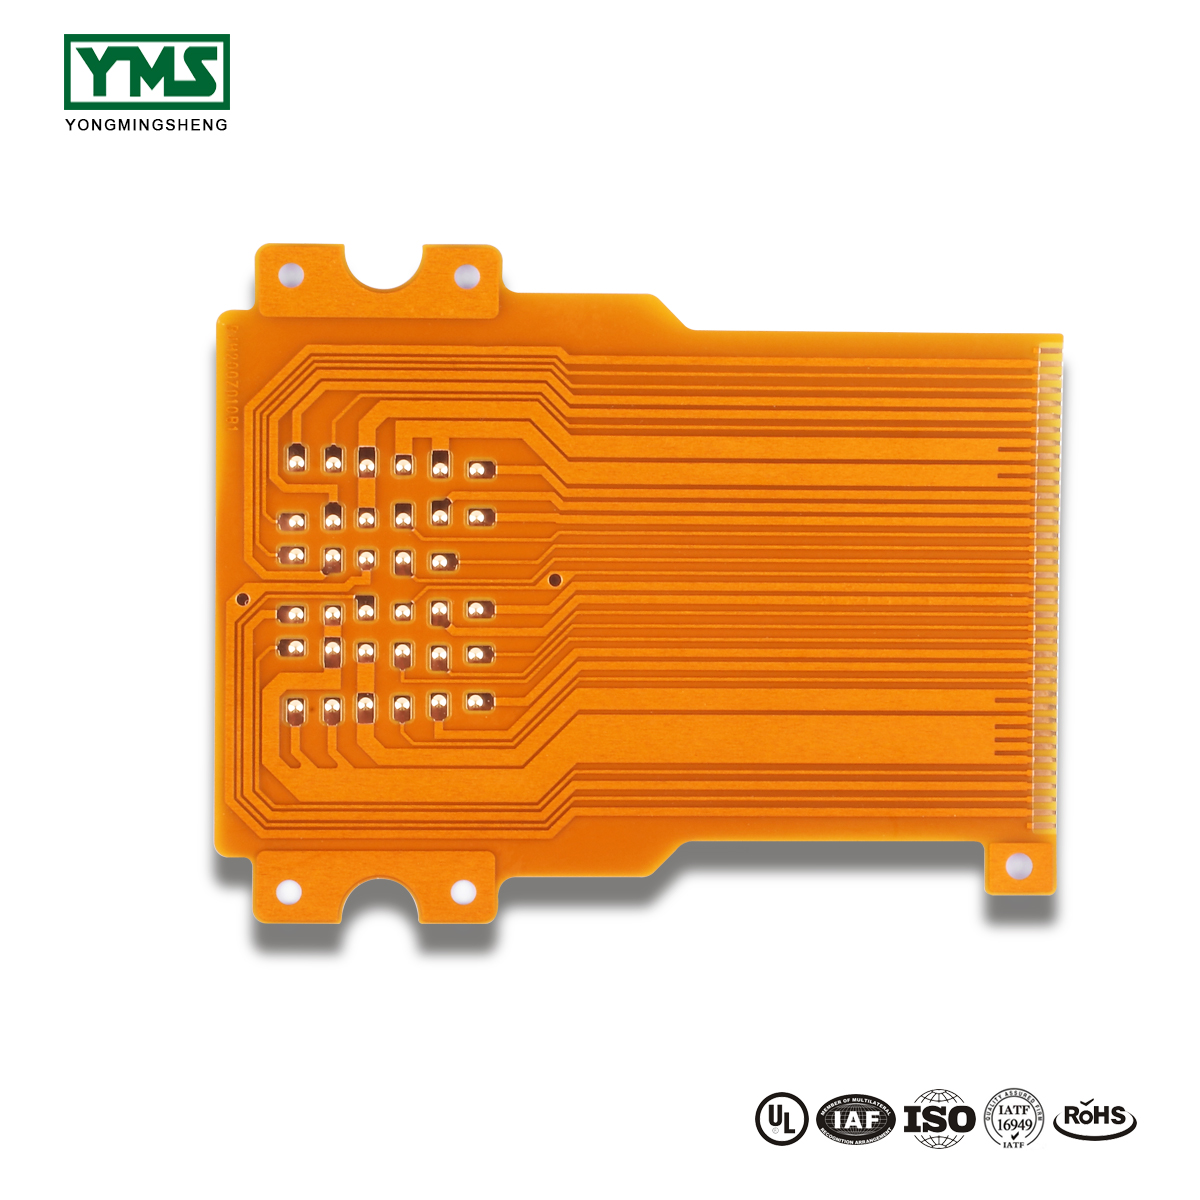 PriceList for 2layer Fpc - 1Layer Raised Point flexible Board | YMSPCB – Yongmingsheng